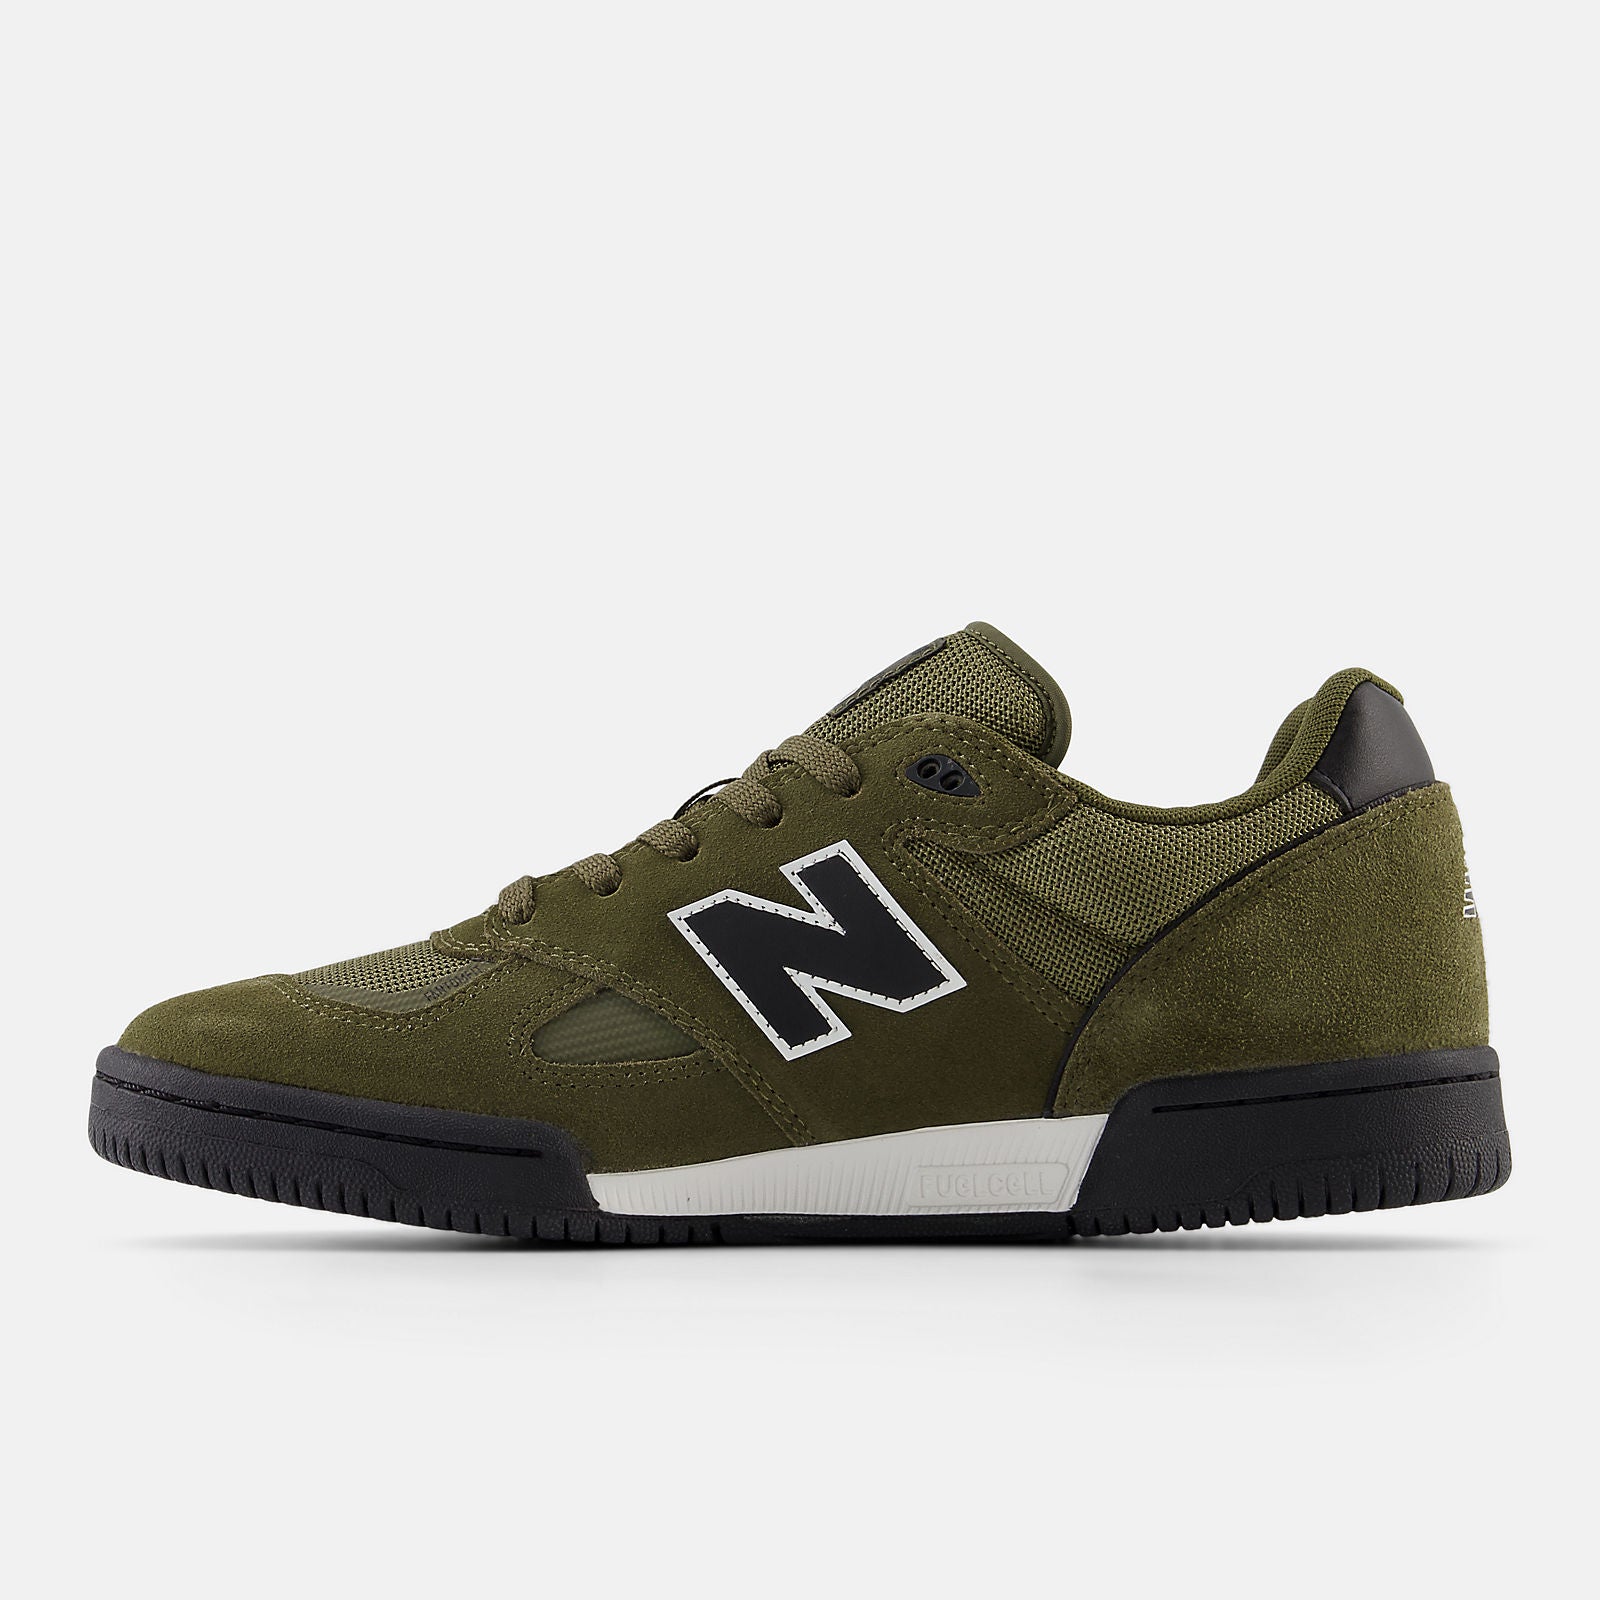 NB Numeric Tom Knox 600 Sneakers - Olive with Black